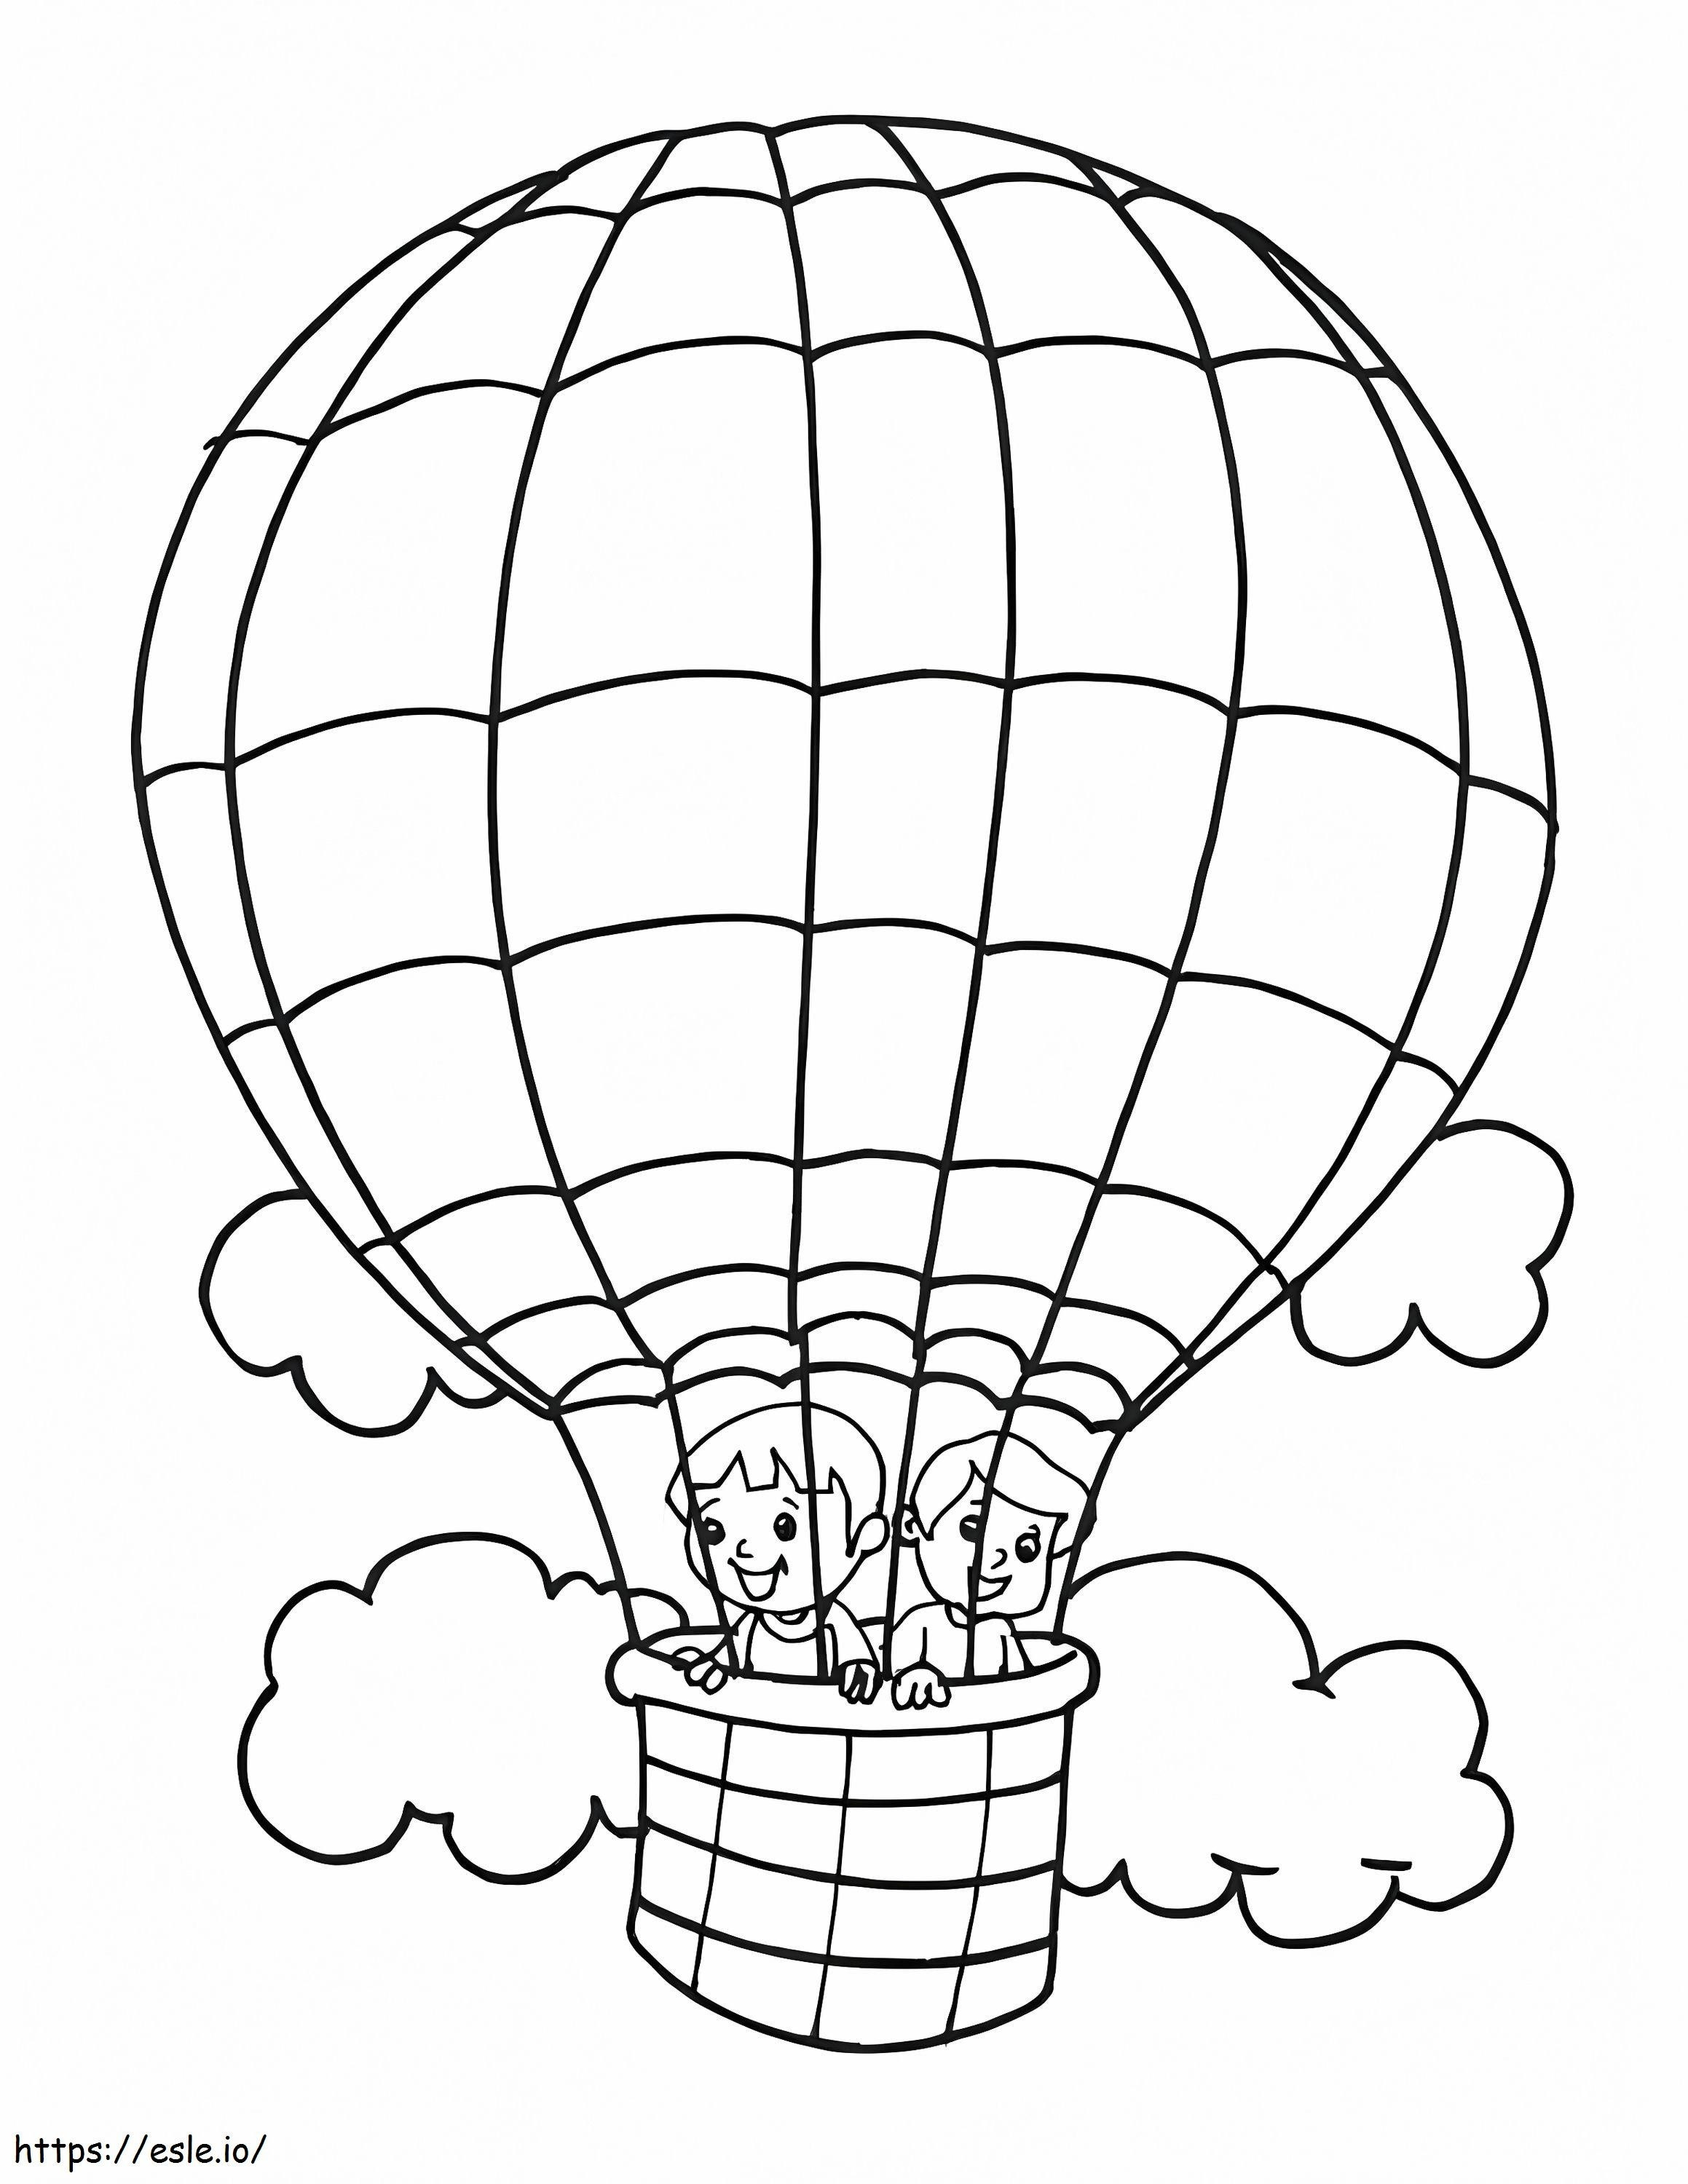 Two Children In Hot Air Balloon coloring page